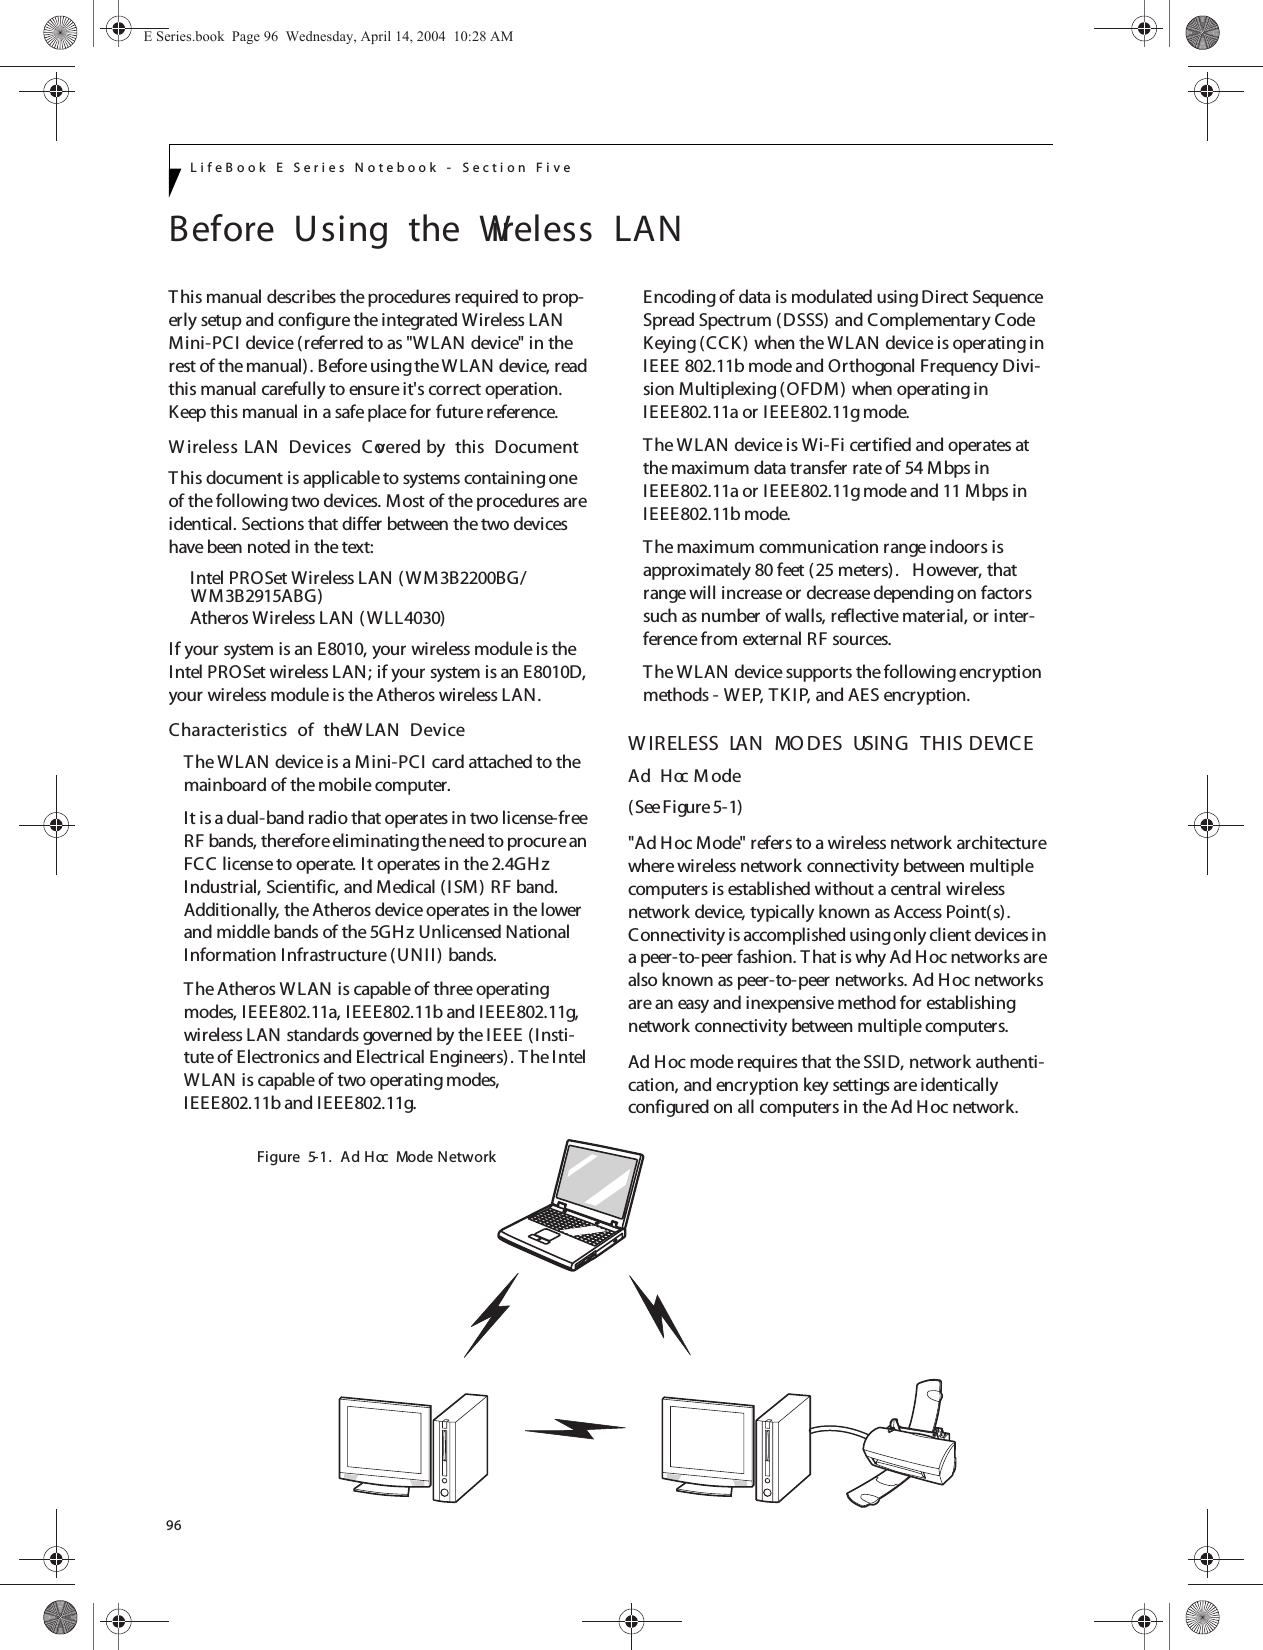 96LifeBook E Series Notebook - Section FiveBefore  Using  the  Wireless  LANThis manual describes the procedures required to prop-erly setup and configure the integrated Wireless LAN Mini-PCI device (referred to as &quot;W LAN device&quot; in the rest of the manual). Before using the WLAN device, read this manual carefully to ensure it&apos;s correct operation. Keep this manual in a safe place for future reference.W ireless LAN  Devices  Covered by  this  DocumentThis document is applicable to systems containing one of the following two devices. Most of the procedures are identical. Sections that differ between the two devices have been noted in the text:Intel PROSet Wireless LAN (WM3B2200BG/Atheros Wireless LAN ( WLL4030)If your system is an E8010, your wireless module is the Intel PROSet wireless LAN; if your system is an E8010D, your wireless module is the Atheros wireless LAN.Characteristics  of  the W LAN  DeviceThe WLAN device is a Mini-PCI  card attached to the mainboard of the mobile computer. It is a dual-band radio that operates in two license-free RF bands, therefore eliminating the need to procure an FCC license to operate. It operates in the 2.4GH z Industrial, Scientific, and Medical (ISM) RF band. Additionally, the Atheros device operates in the lower and middle bands of the 5GHz Unlicensed National Information Infrastructure (UNII ) bands. The Atheros WLAN is capable of three operating modes, I EEE802.11a, IEEE802.11b and IEEE802.11g, wireless LAN standards governed by the IEEE (Insti-tute of Electronics and Electrical Engineers). T he Intel WLAN is capable of two operating modes, IEEE802.11b and IEEE802.11g.Encoding of data is modulated using Direct Sequence Spread Spectrum (DSSS) and Complementary Code Keying (CCK) when the WLAN device is operating in IEEE 802.11b mode and Orthogonal Frequency Divi-sion Multiplexing (OFDM) when operating in IEEE802.11a or IEEE802.11g mode. The WLAN device is Wi-Fi certified and operates at the maximum data transfer rate of 54 Mbps in IEEE802.11a or IEEE802.11g mode and 11 Mbps in IEEE802.11b mode.The maximum communication range indoors is approximately 80 feet (25 meters).   However, that range will increase or decrease depending on factors such as number of walls, reflective material, or inter-ference from external RF sources.The WLAN device supports the following encryption methods - WEP, TK I P, and AES encryption.W IRELESS  LAN  MO DES  USING  THIS  DEVICEAd  Hoc M ode (See Figure 5-1)&quot;Ad Hoc Mode&quot; refers to a wireless network architecture where wireless network connectivity between multiple computers is established without a central wireless network device, typically known as Access Point(s). Connectivity is accomplished using only client devices in a peer-to-peer fashion. T hat is why Ad Hoc networks are also known as peer-to-peer networks. Ad Hoc networks are an easy and inexpensive method for establishing network connectivity between multiple computers.Ad Hoc mode requires that the SSID, network authenti-cation, and encryption key settings are identically configured on all computers in the Ad Hoc network. Figure  5-1.  Ad  Hoc  Mode NetworkE Series.book  Page 96  Wednesday, April 14, 2004  10:28 AMWM3B2915ABG)